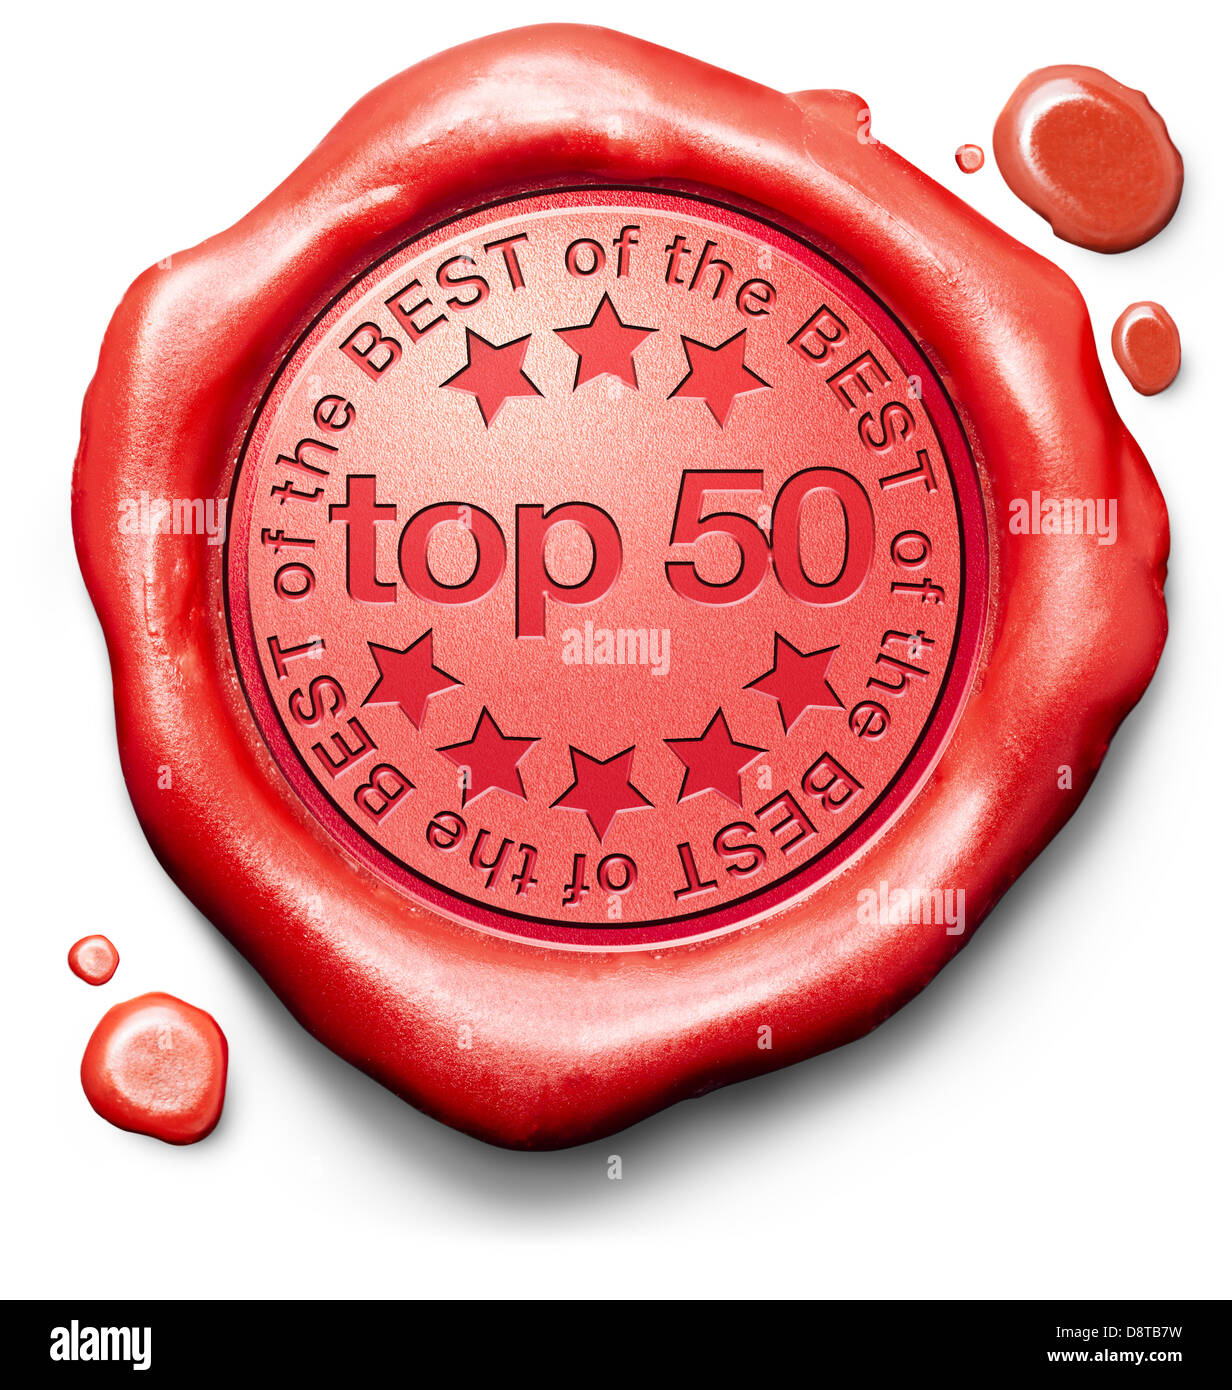 top 5 best bestseller quality label red wax seal stamp or badge Stock Photo